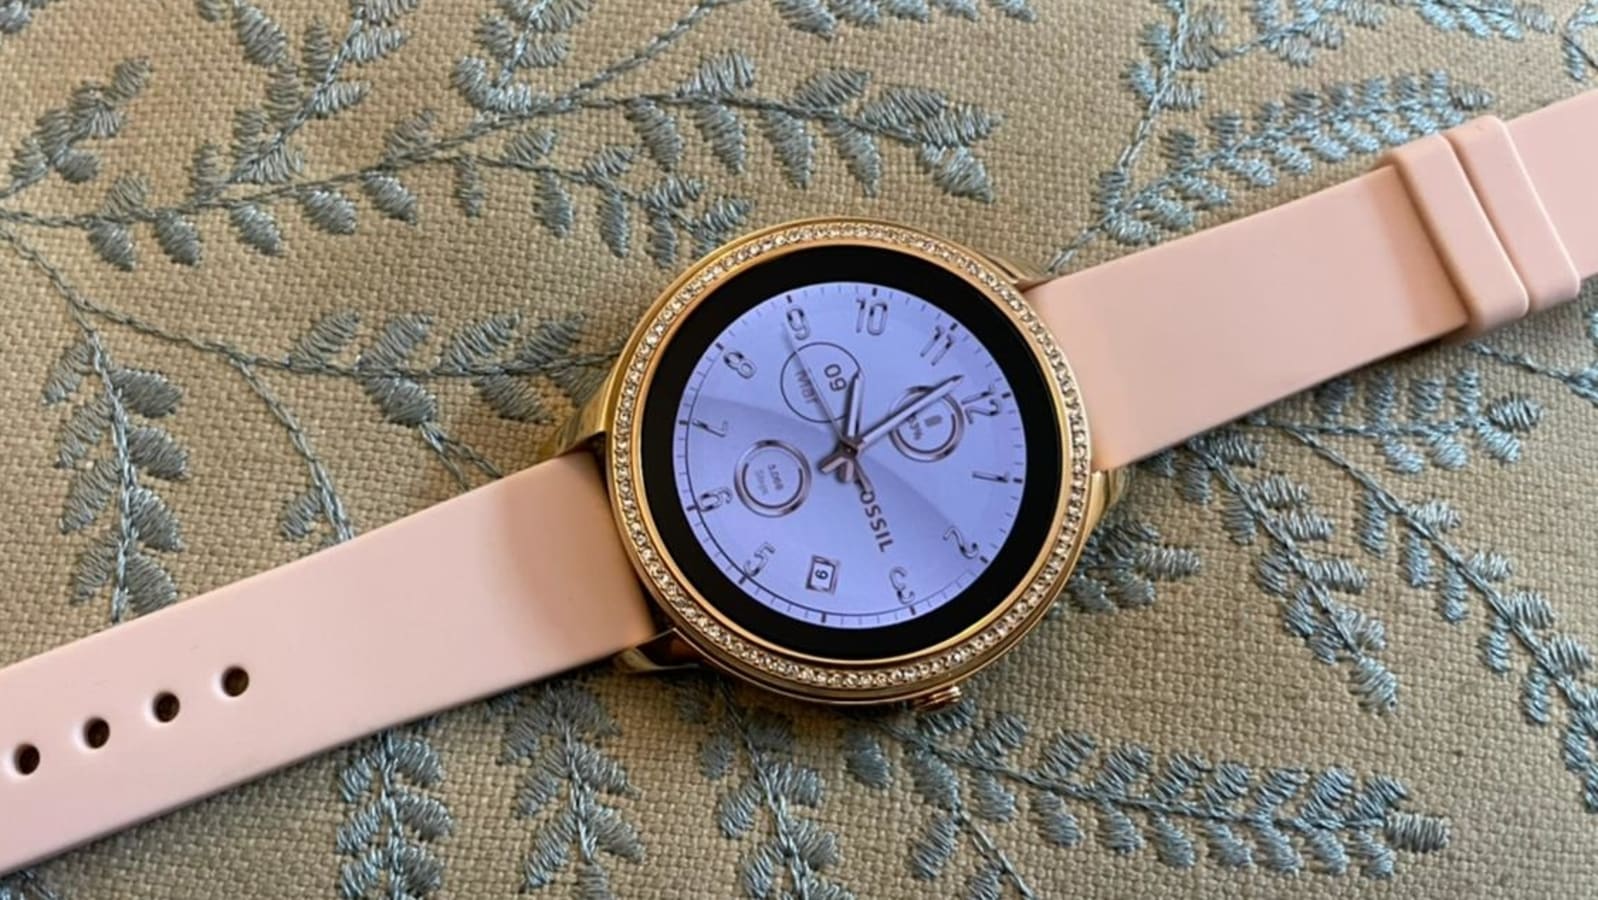 Gen 5E Smartwatches: Your Favorite Features Now In A Smaller Size - Fossil